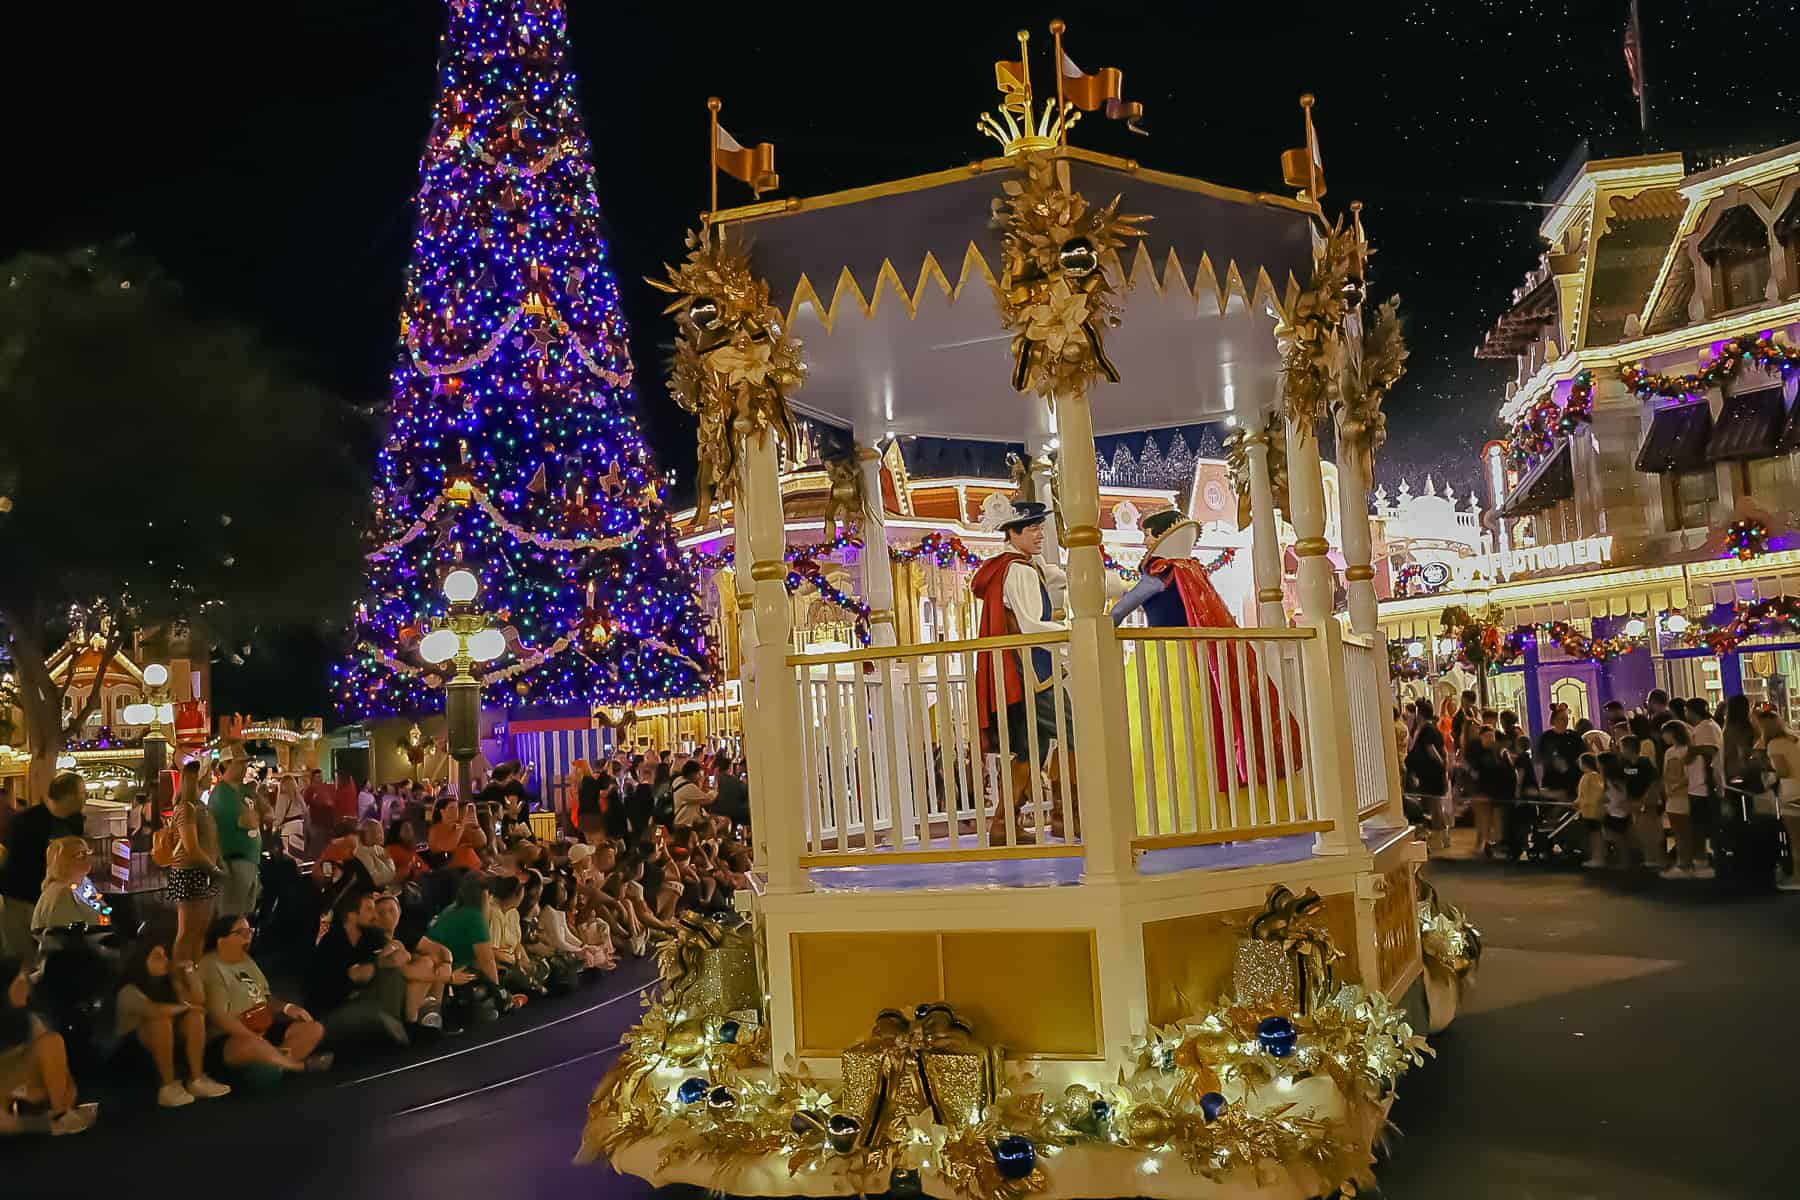 Snow White and The Prince ride in a gazebo float. 